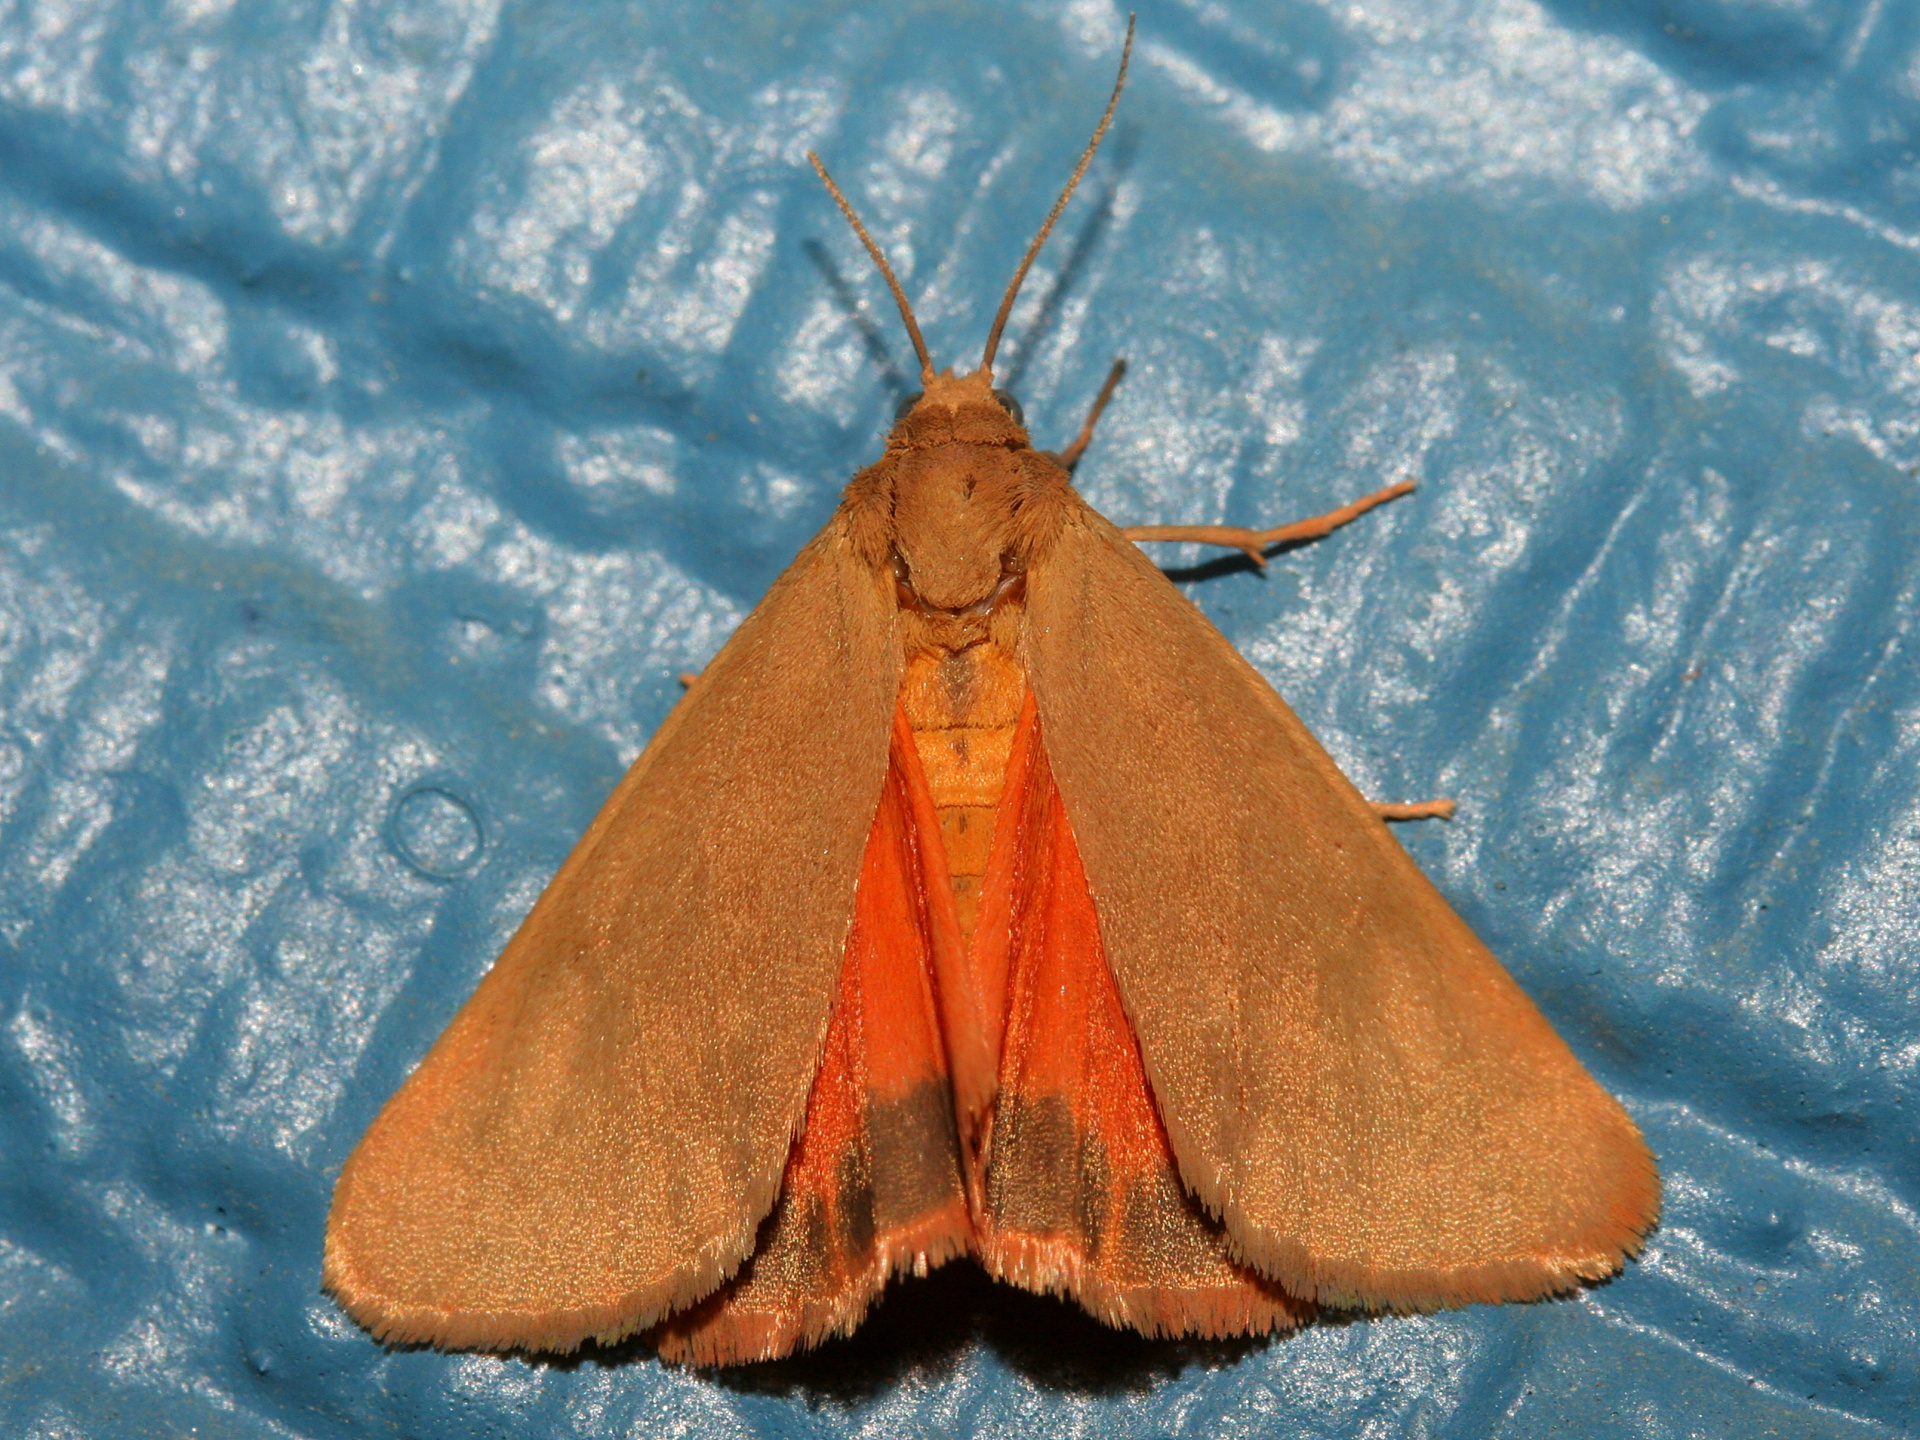 Holomelina aurantiaca (Travels » US Trip 2: Cheyenne Epic » Animals » Insects » Butterfies and Moths » Arctiidae)